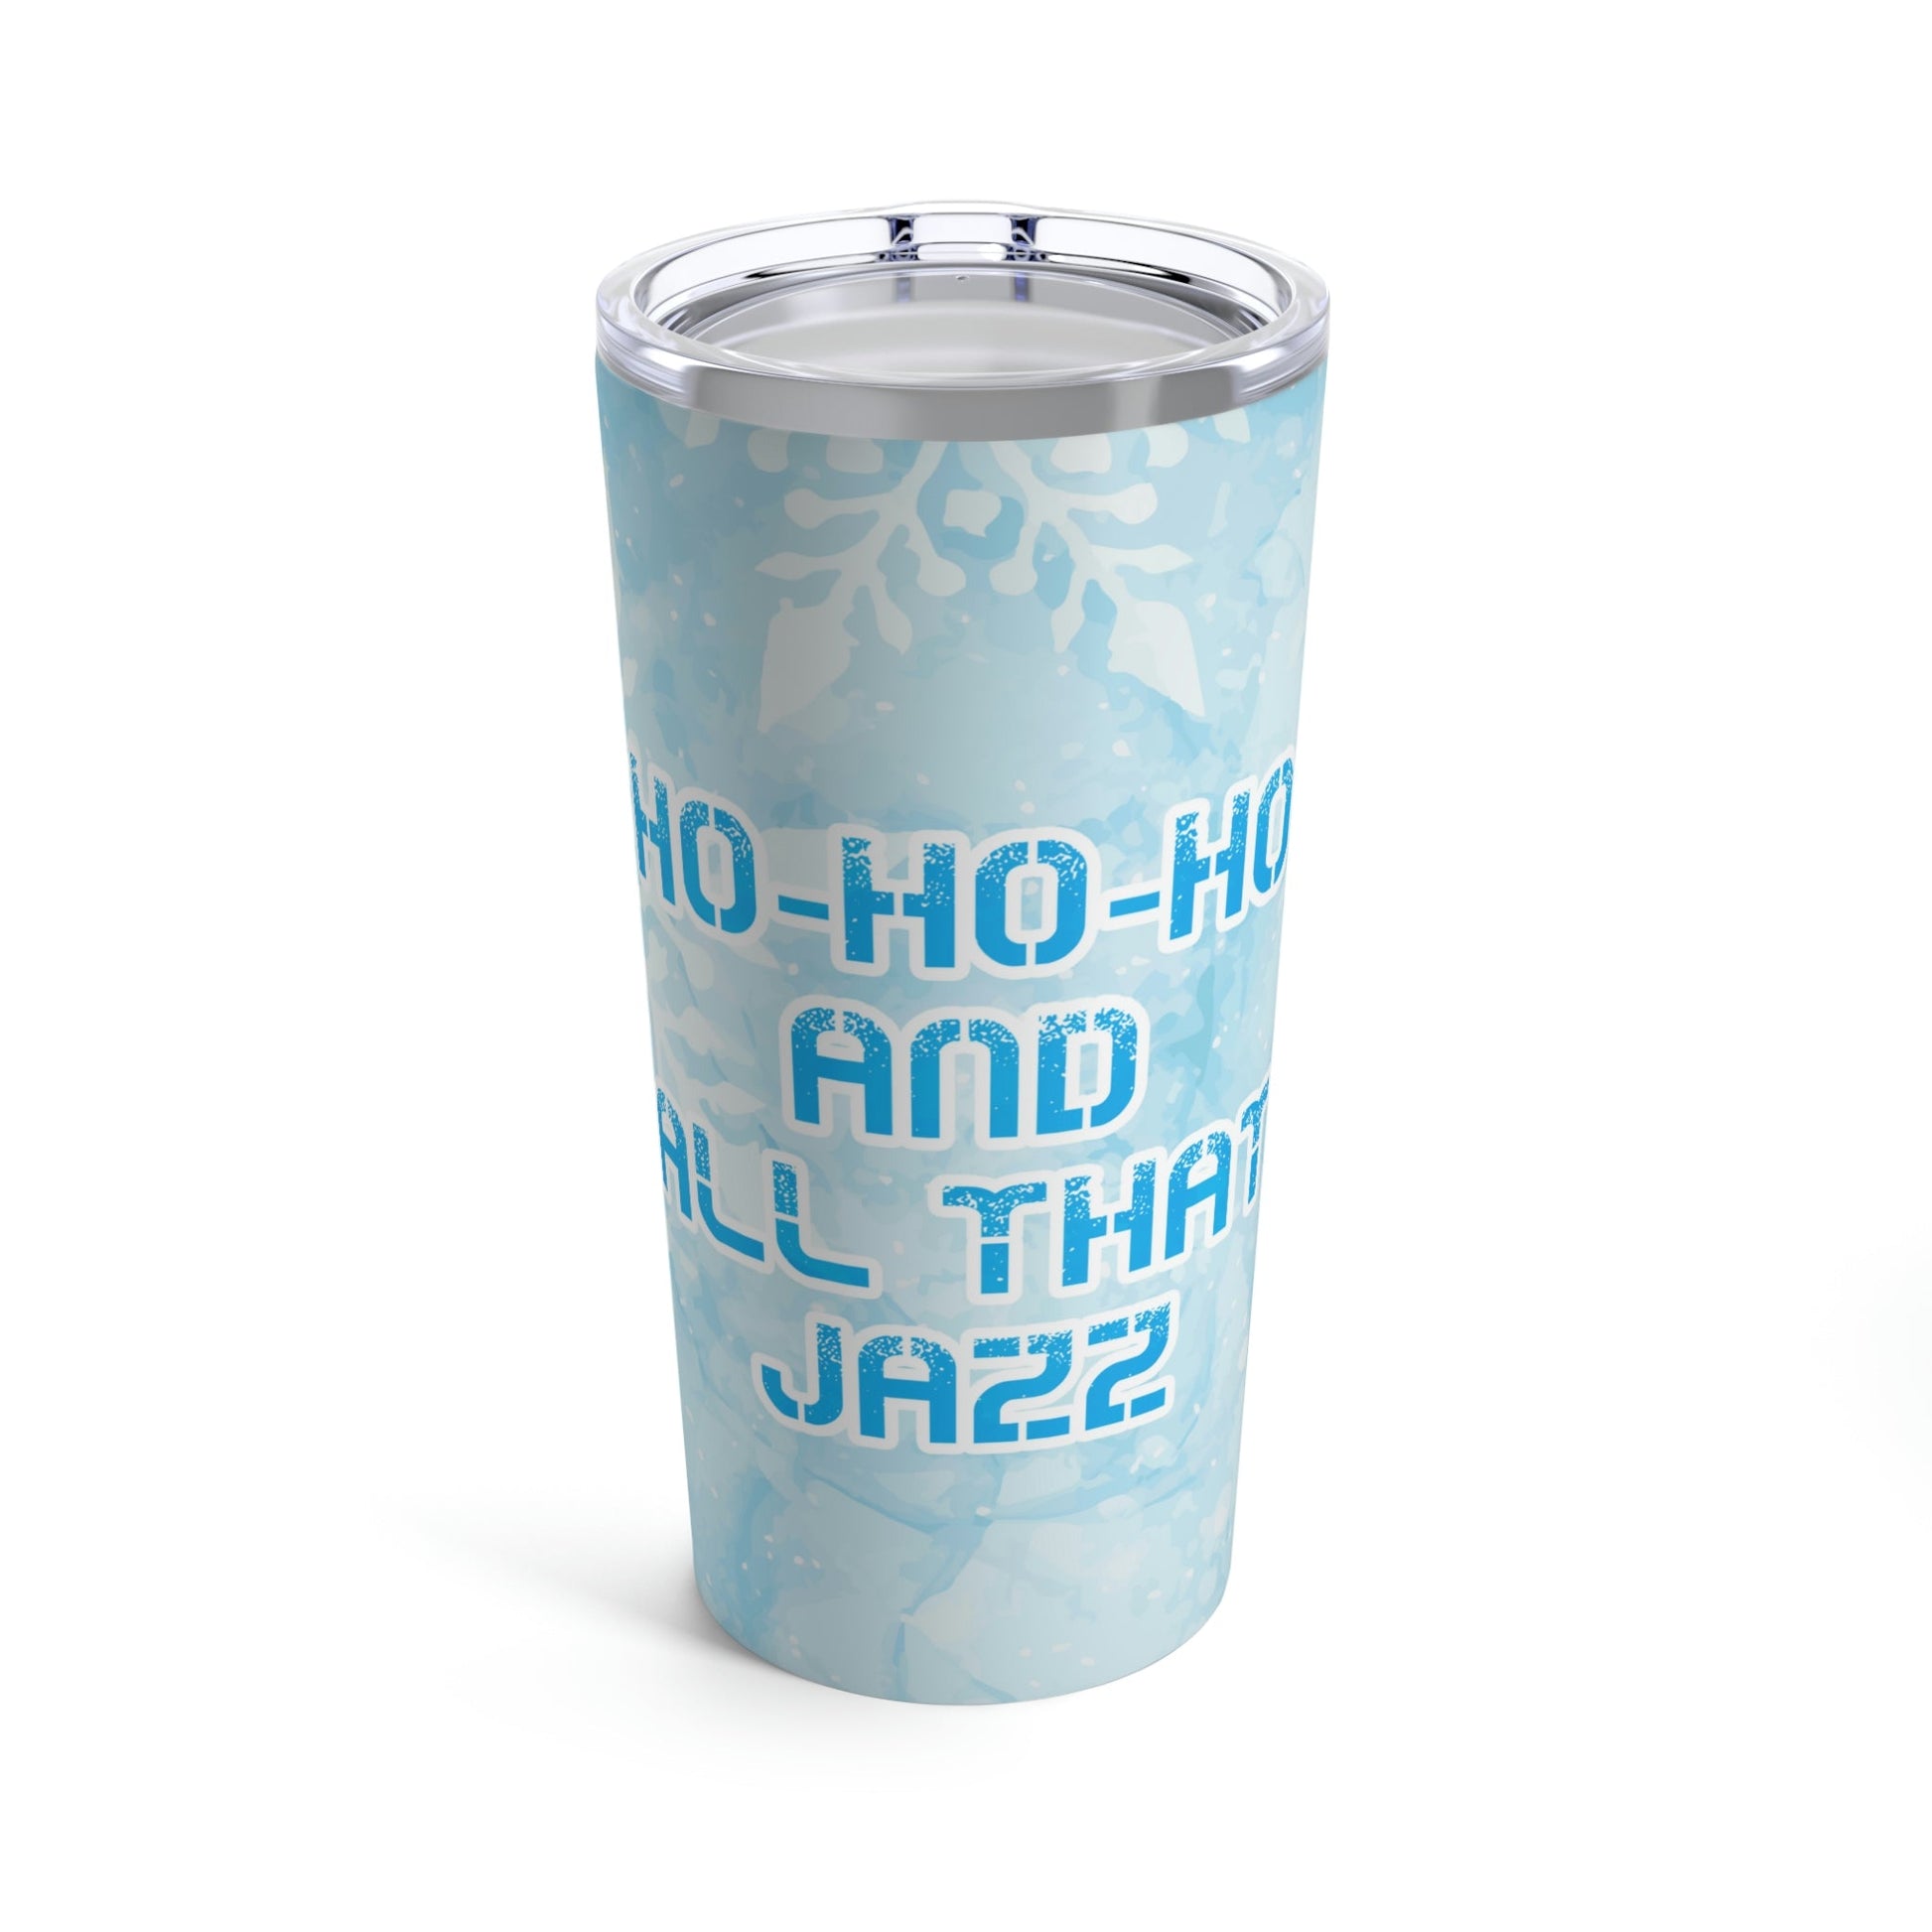 Ho Ho Ho Time And All That Jazz Snowflake Motivation Slogan Stainless Steel Hot or Cold Vacuum Tumbler 20oz Ichaku [Perfect Gifts Selection]